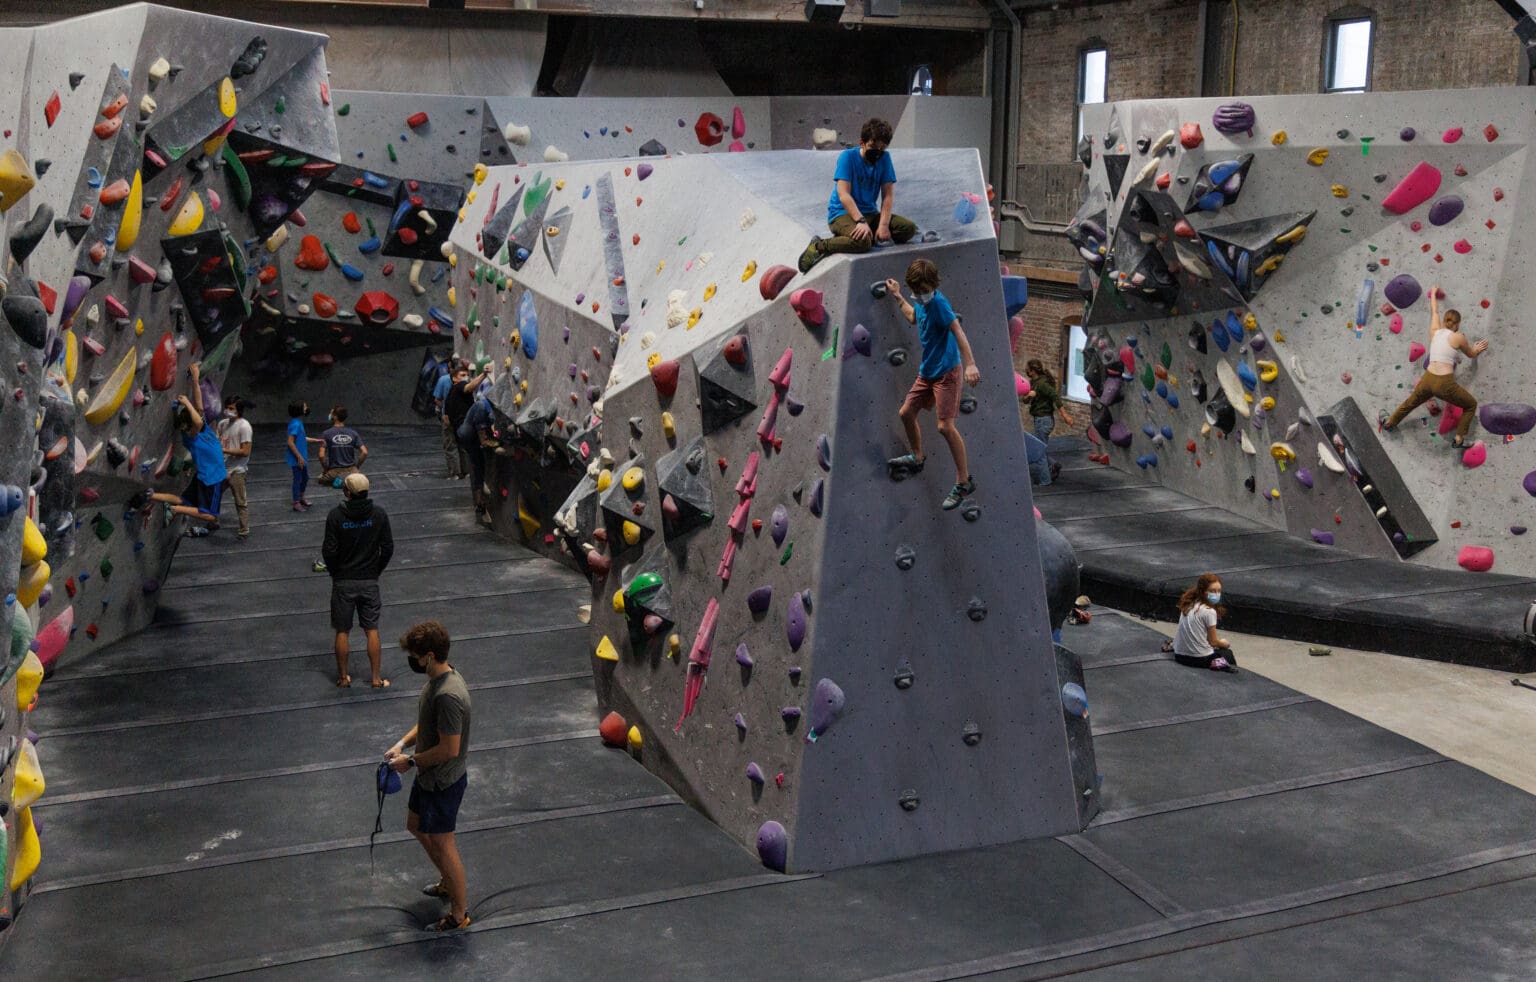 Climbers pick their way through climbing routes on the walls with various colors and shapes for climbers to hold onto.